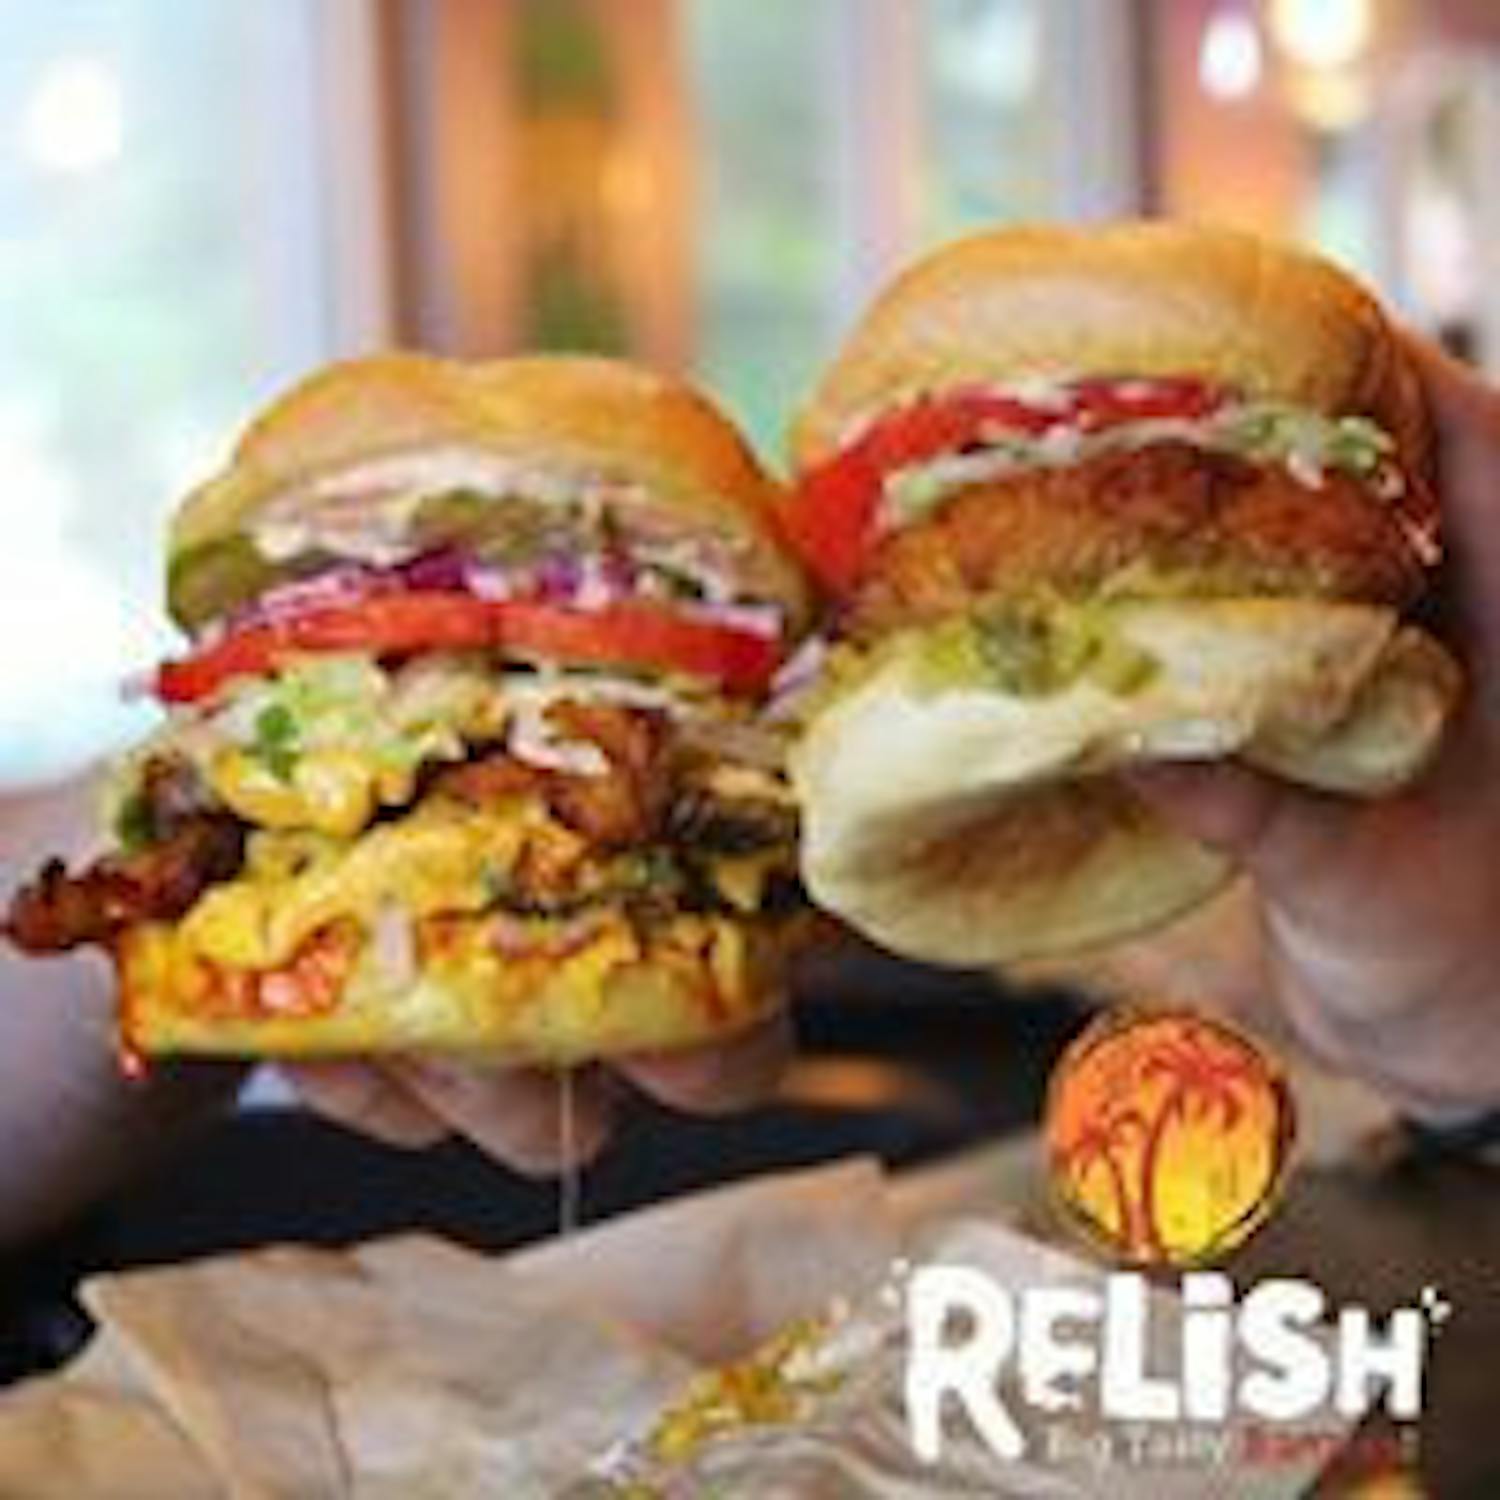 With multiple locations throughout the Gainesville area, Relish has been serving its burgers to students and locals for years.&nbsp;